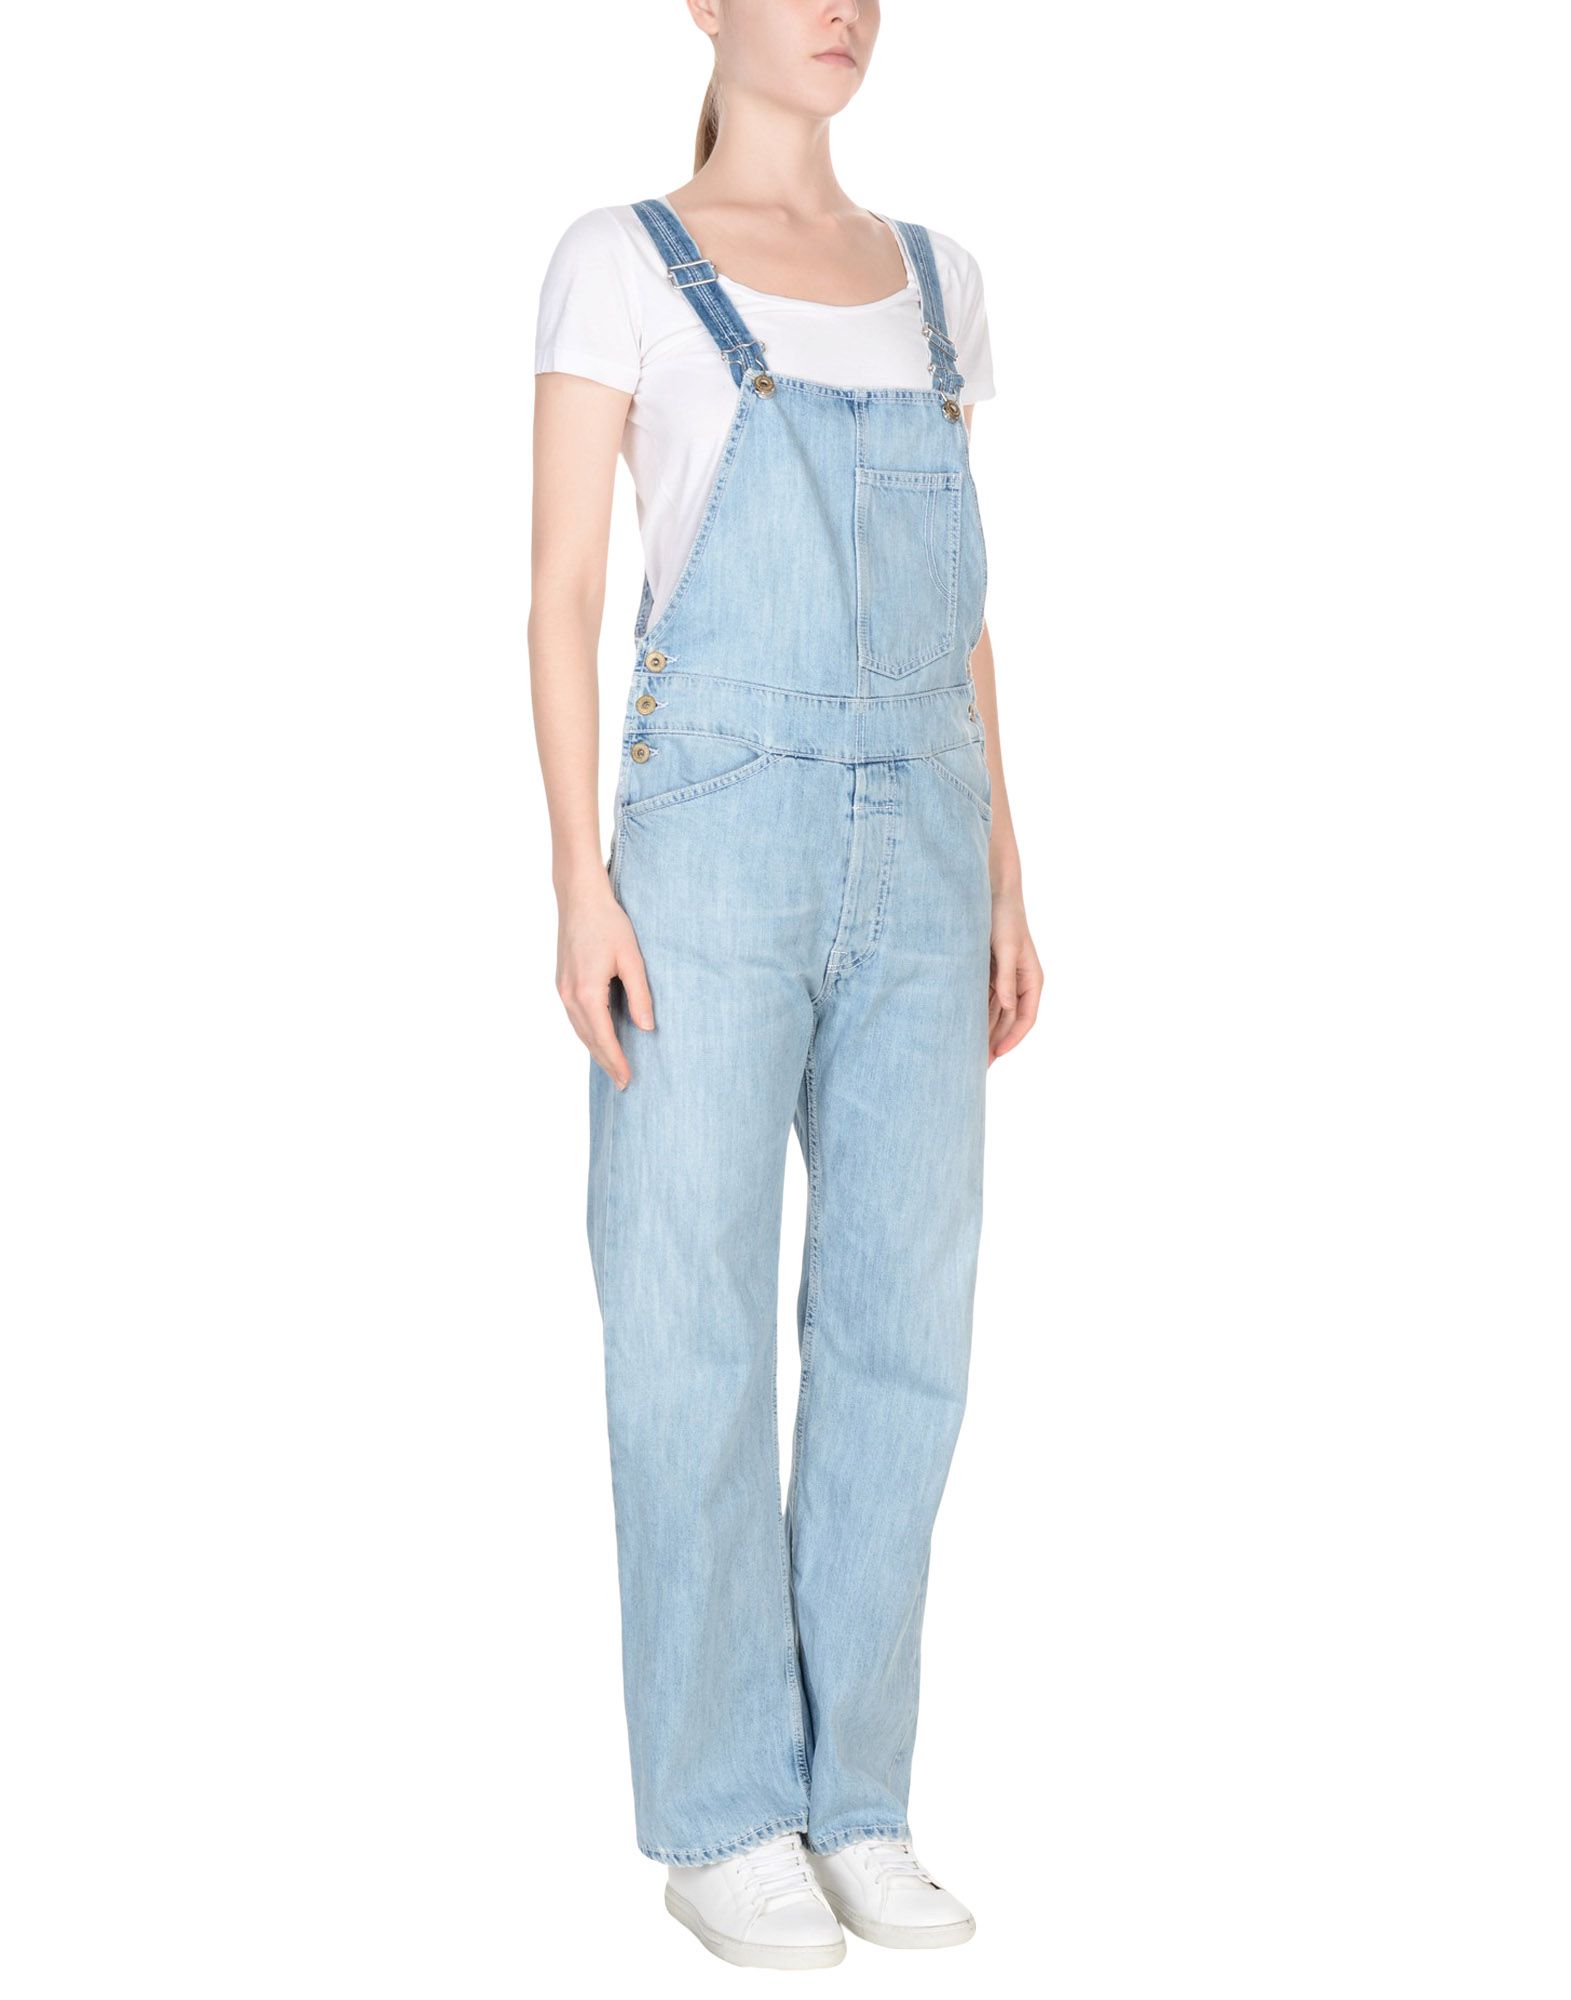 DONDUP DONDUP WOMAN OVERALLS BLUE SIZE 32 COTTON